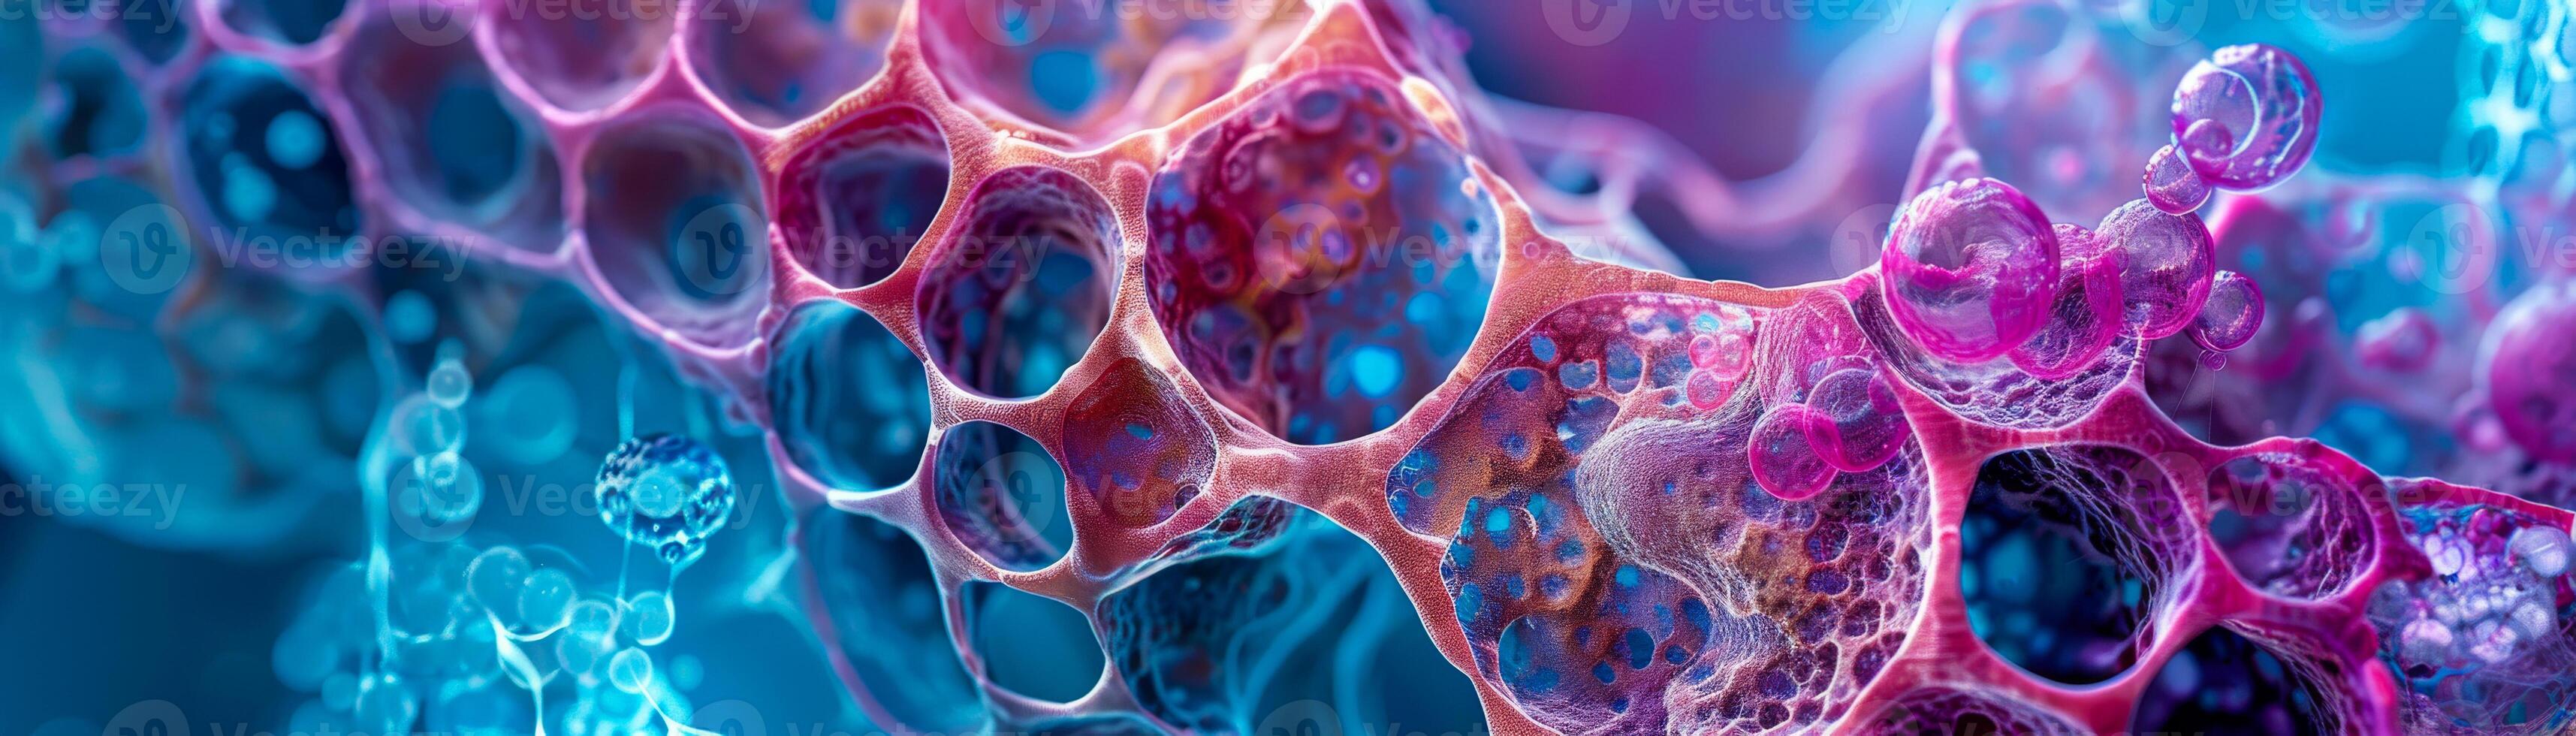 A vivid, abstract representation of cells under a microscope with a dynamic contrast of pink and blue hues photo